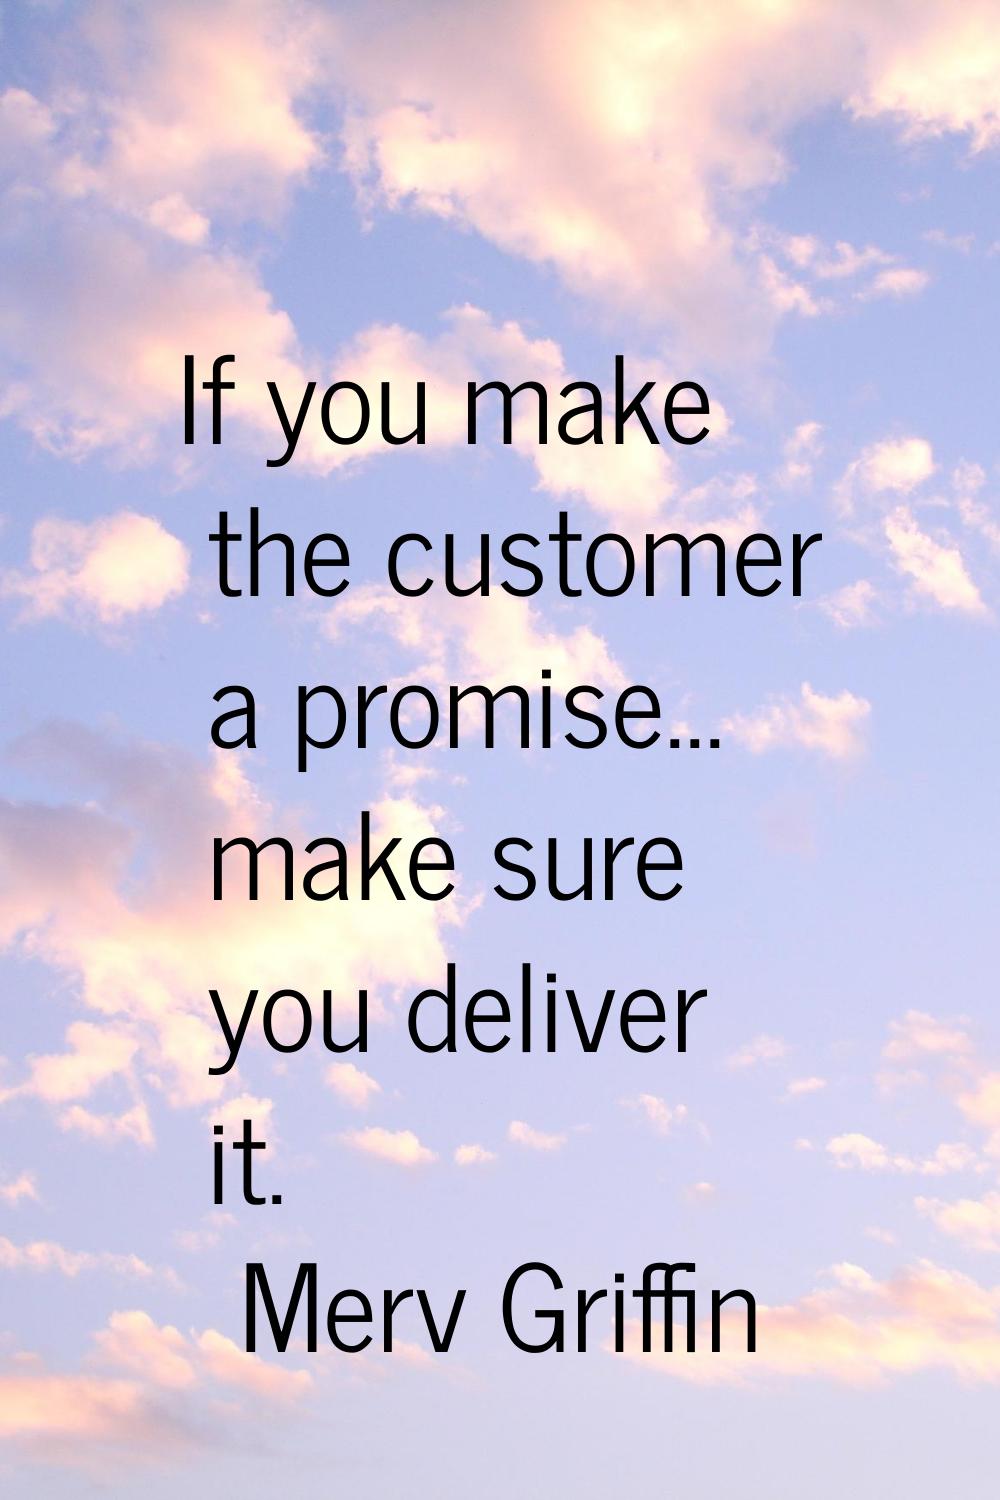 If you make the customer a promise... make sure you deliver it.